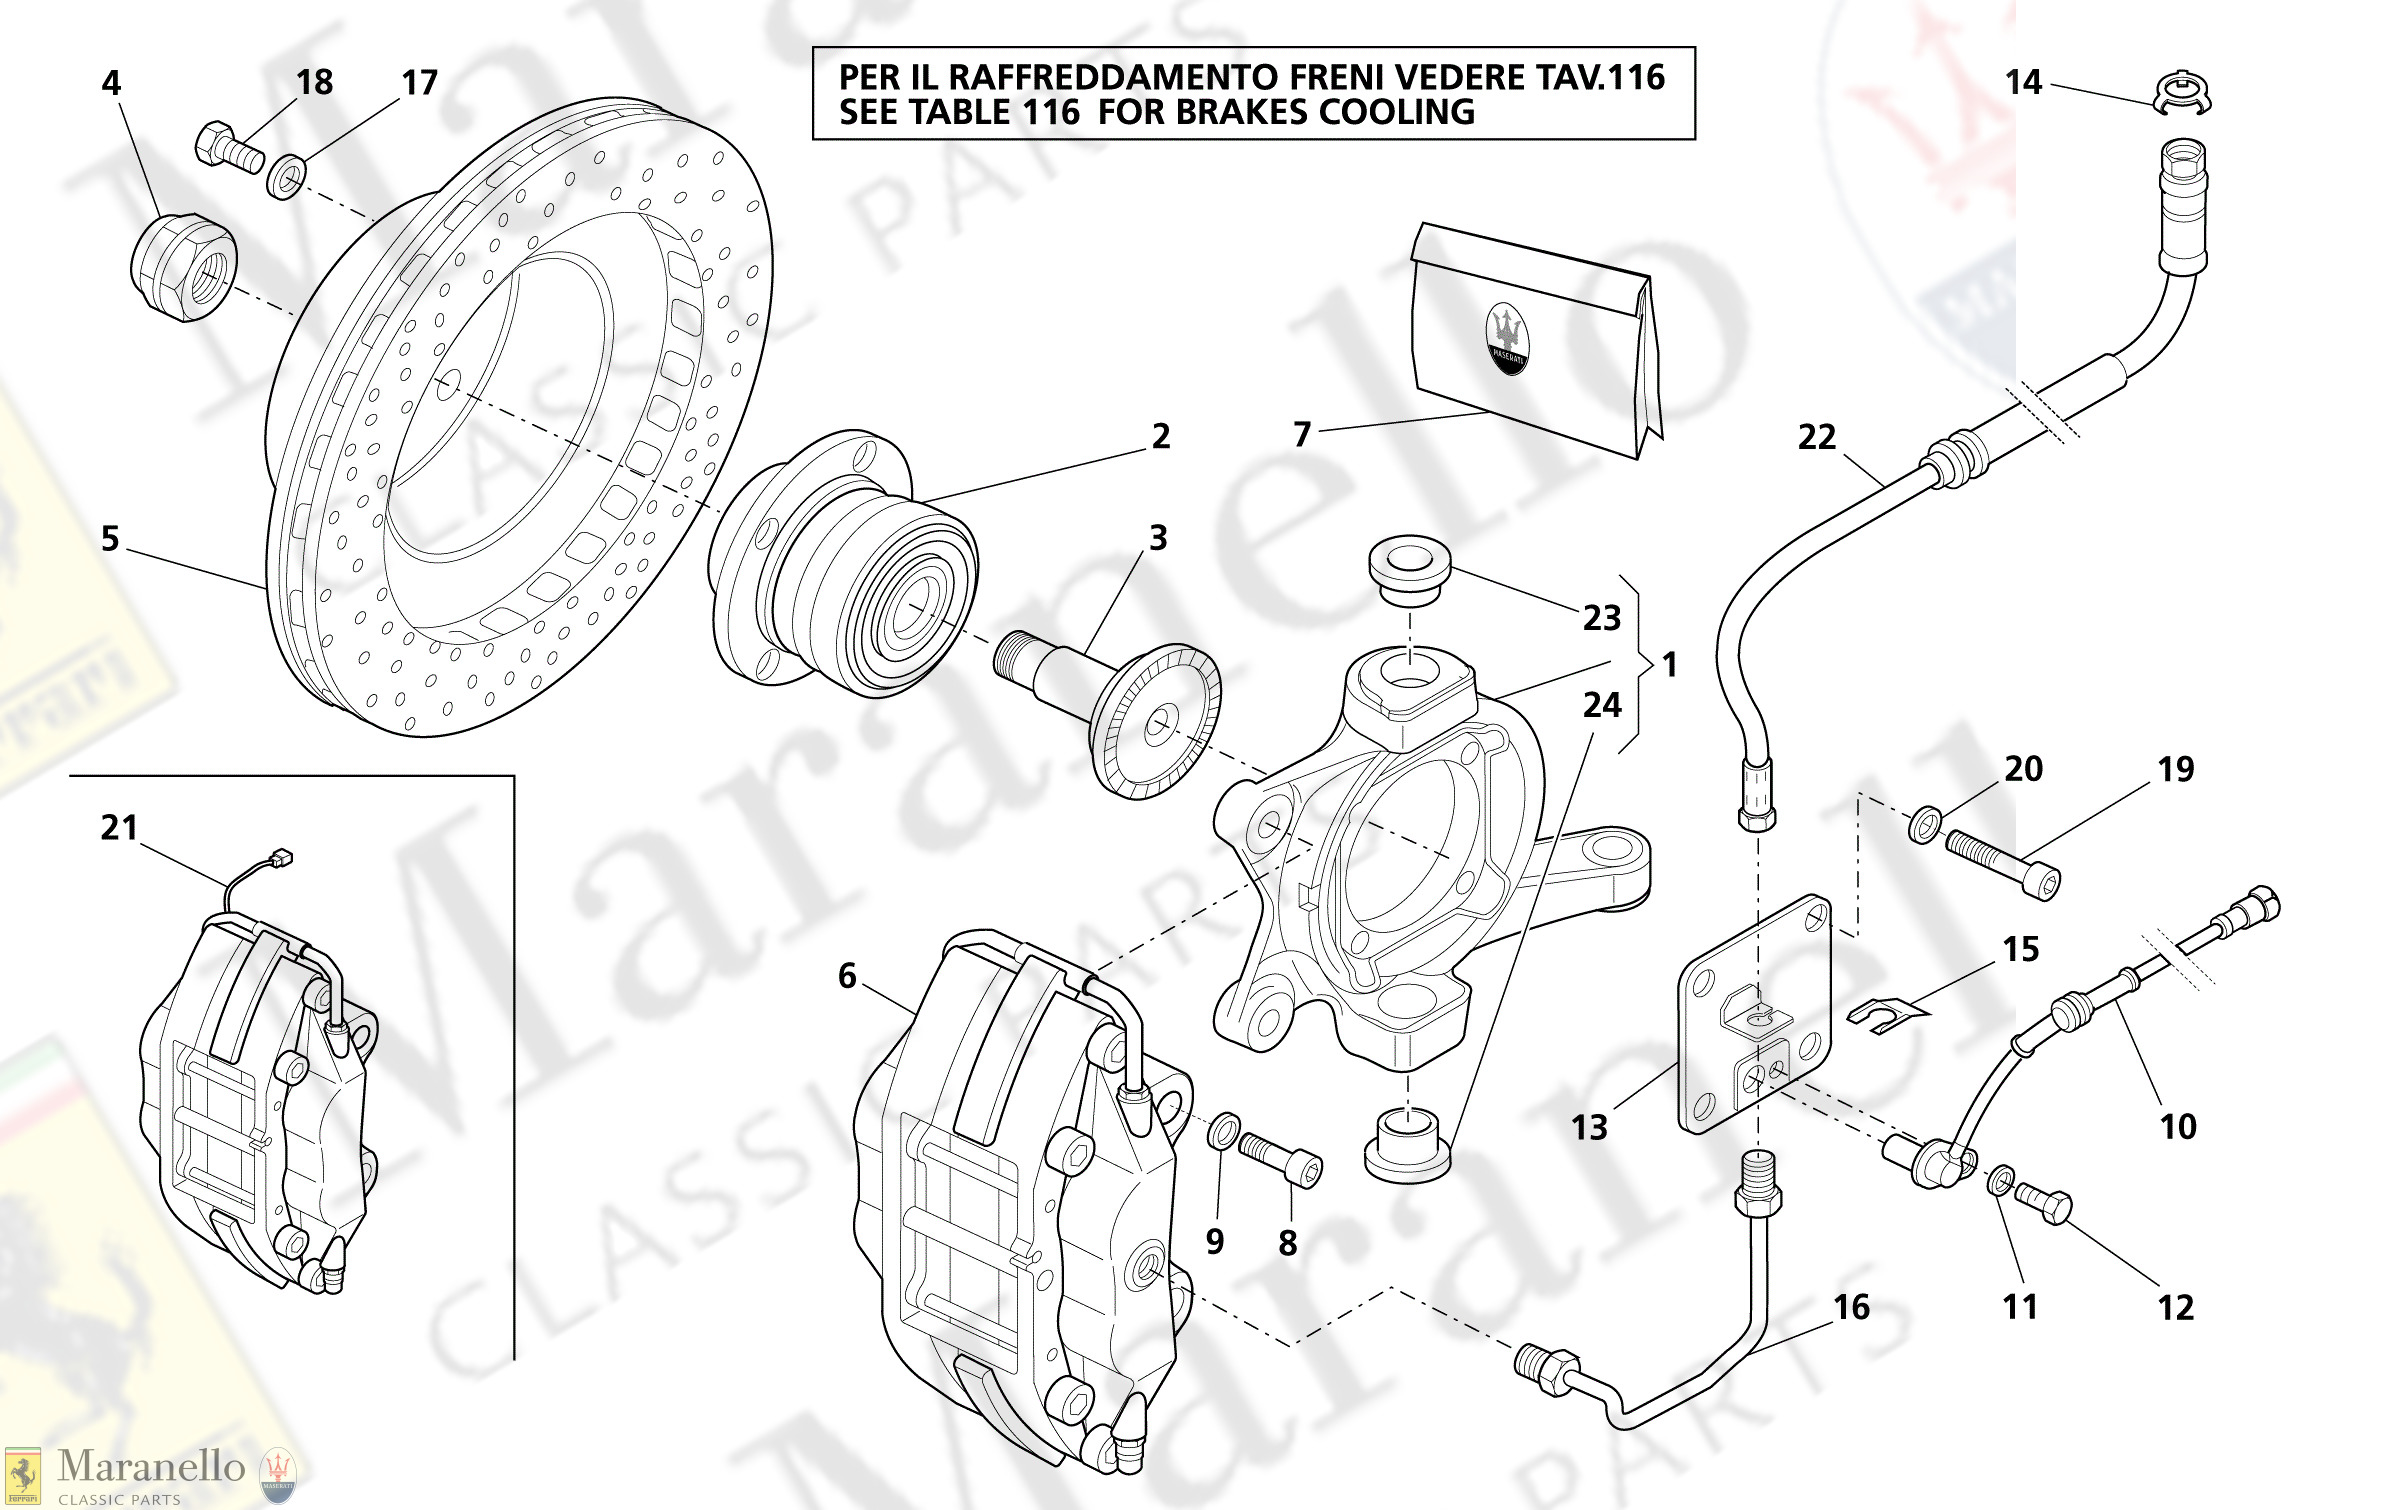 C 062 - Hubs And Front Brakes With Abs